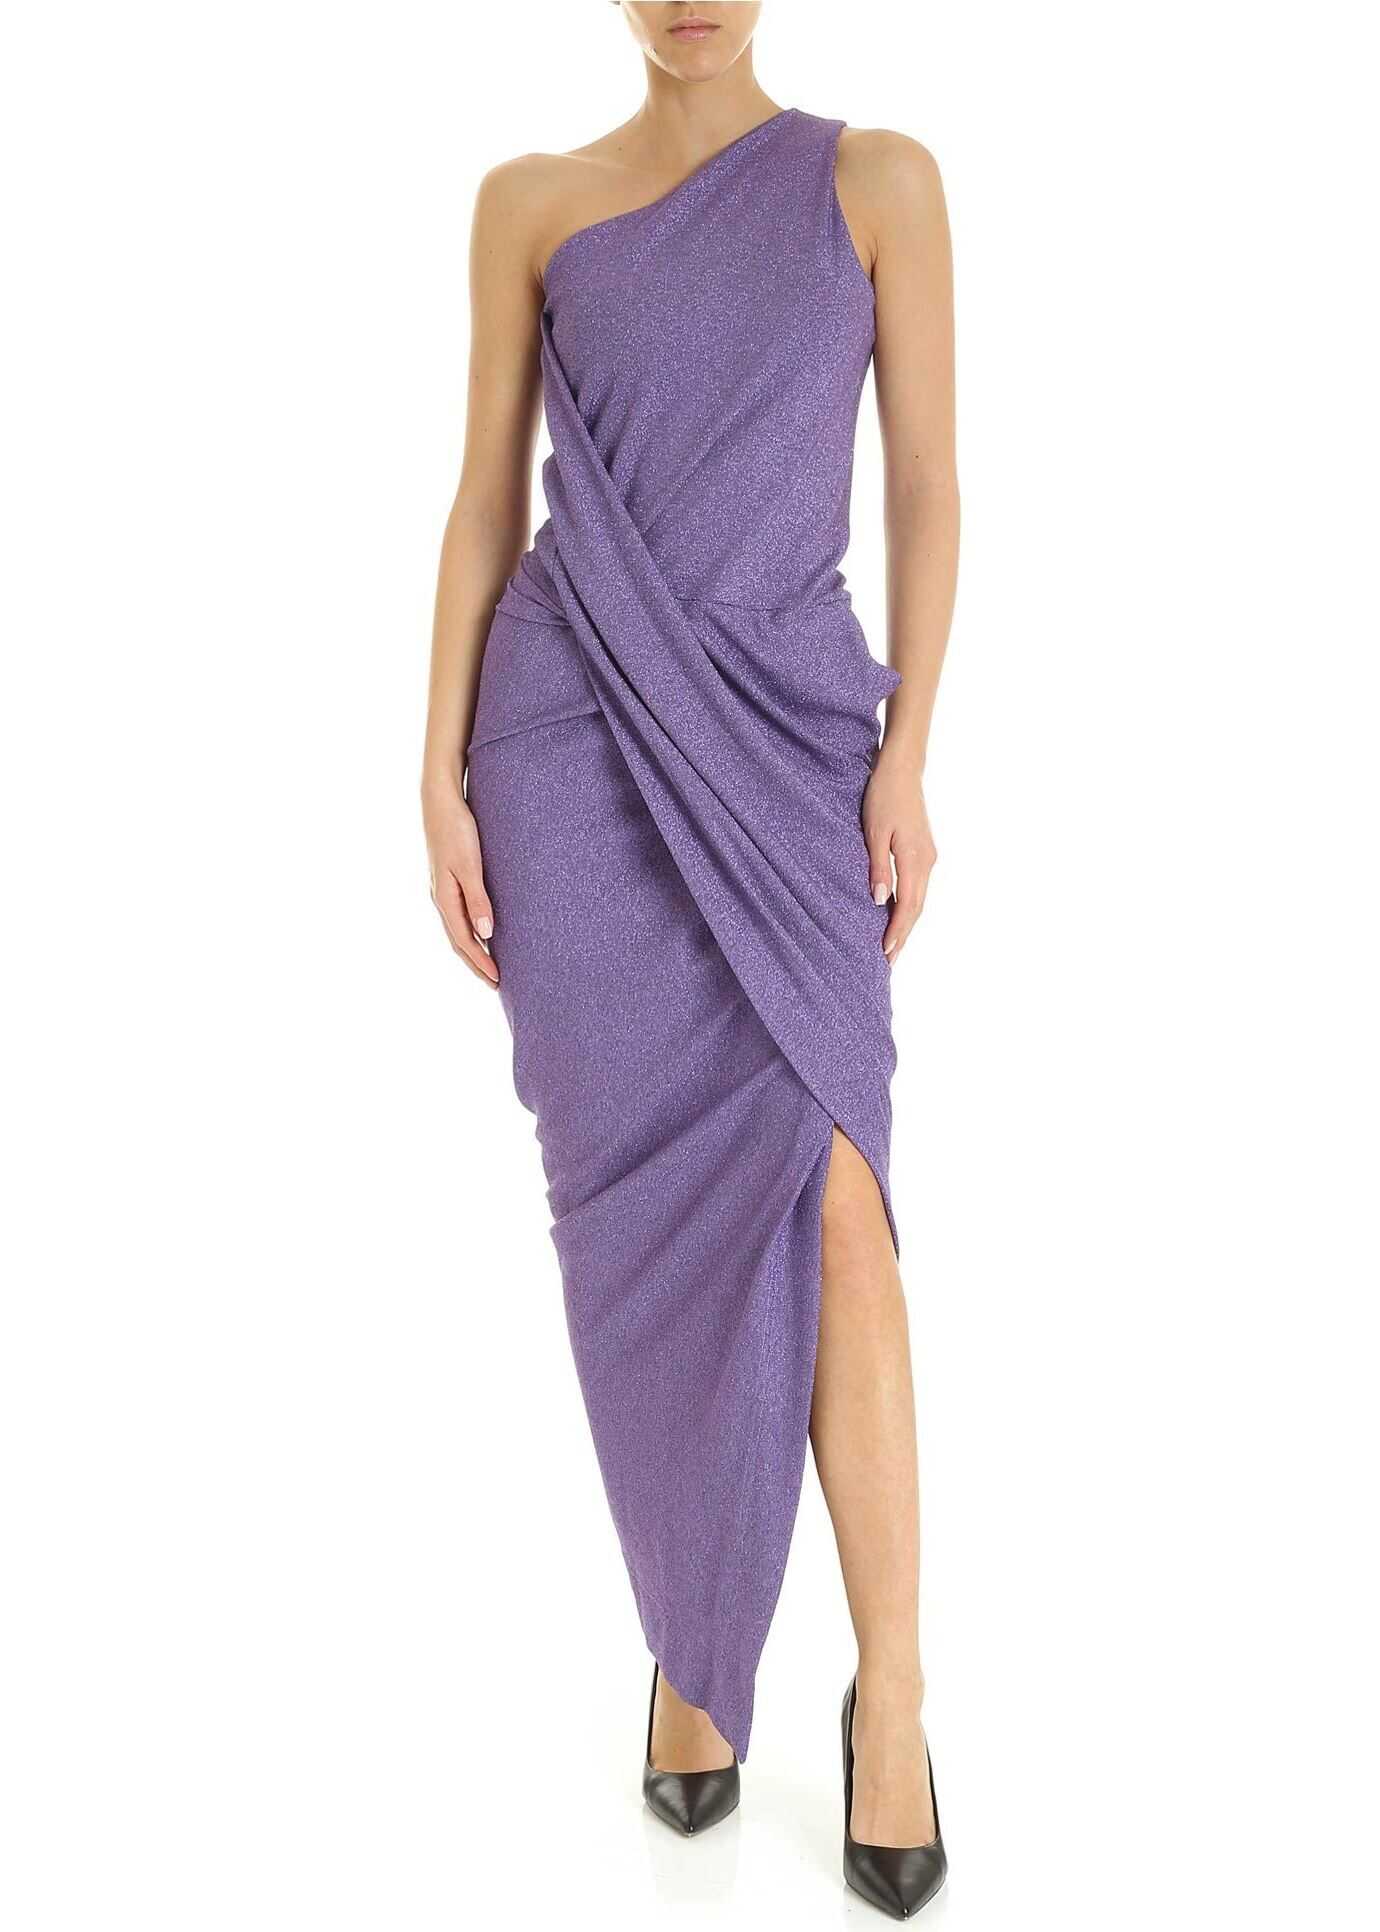 Vivienne Westwood Anglomania Vian One-Shoulder Dress In Lilac Purple